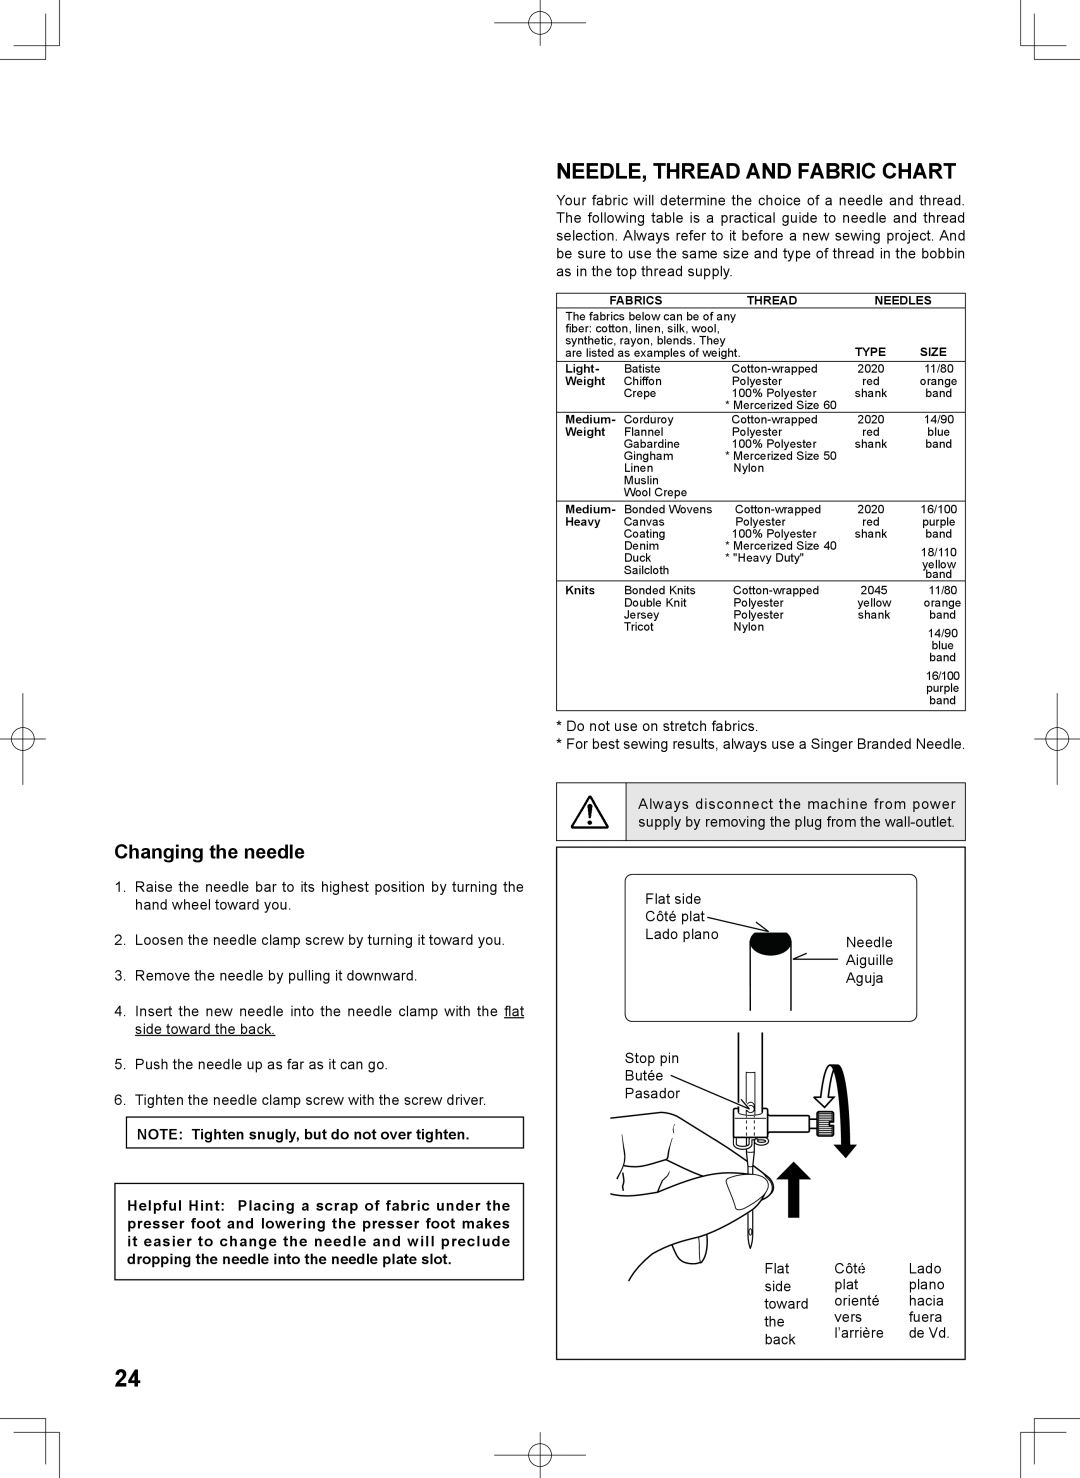 Singer 7467S instruction manual Needle, Thread And Fabric Chart, Changing the needle 